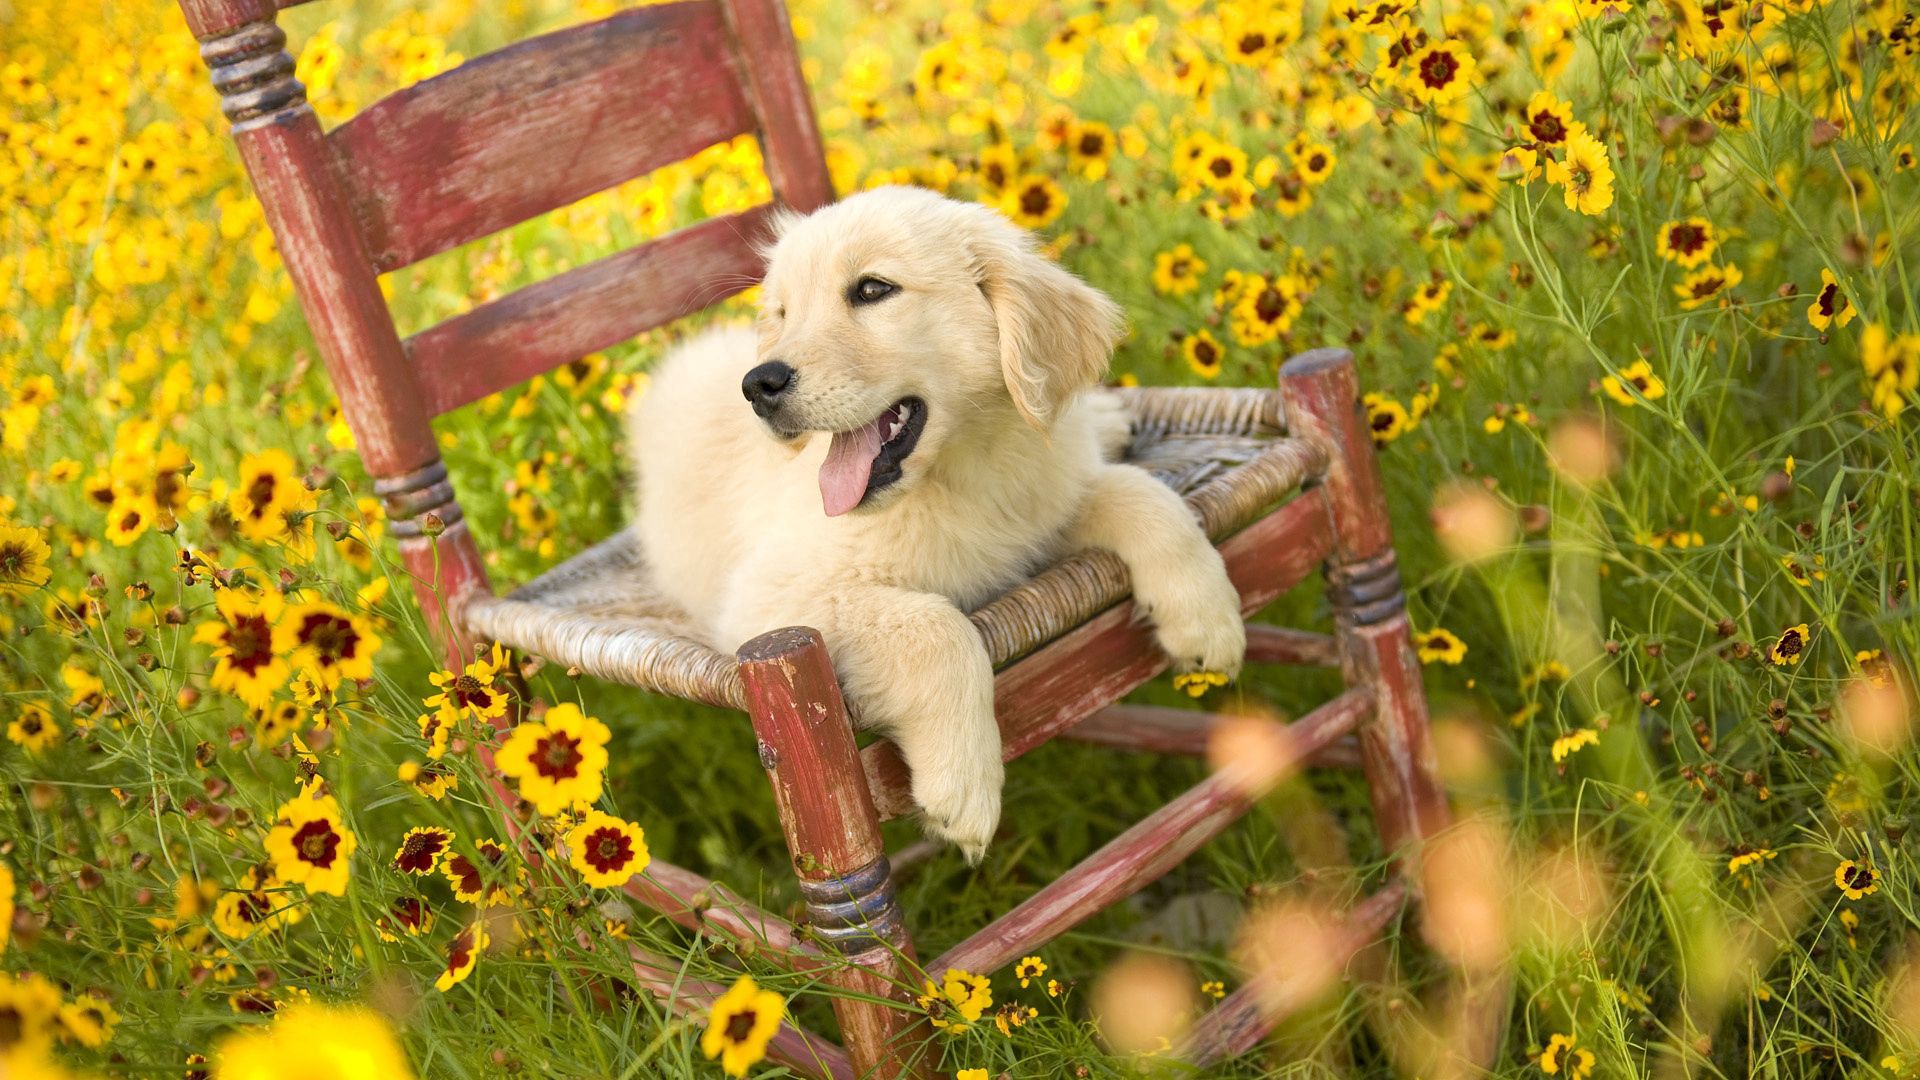 Chair lie, flowers, to lie down, dog Free Stock Photos